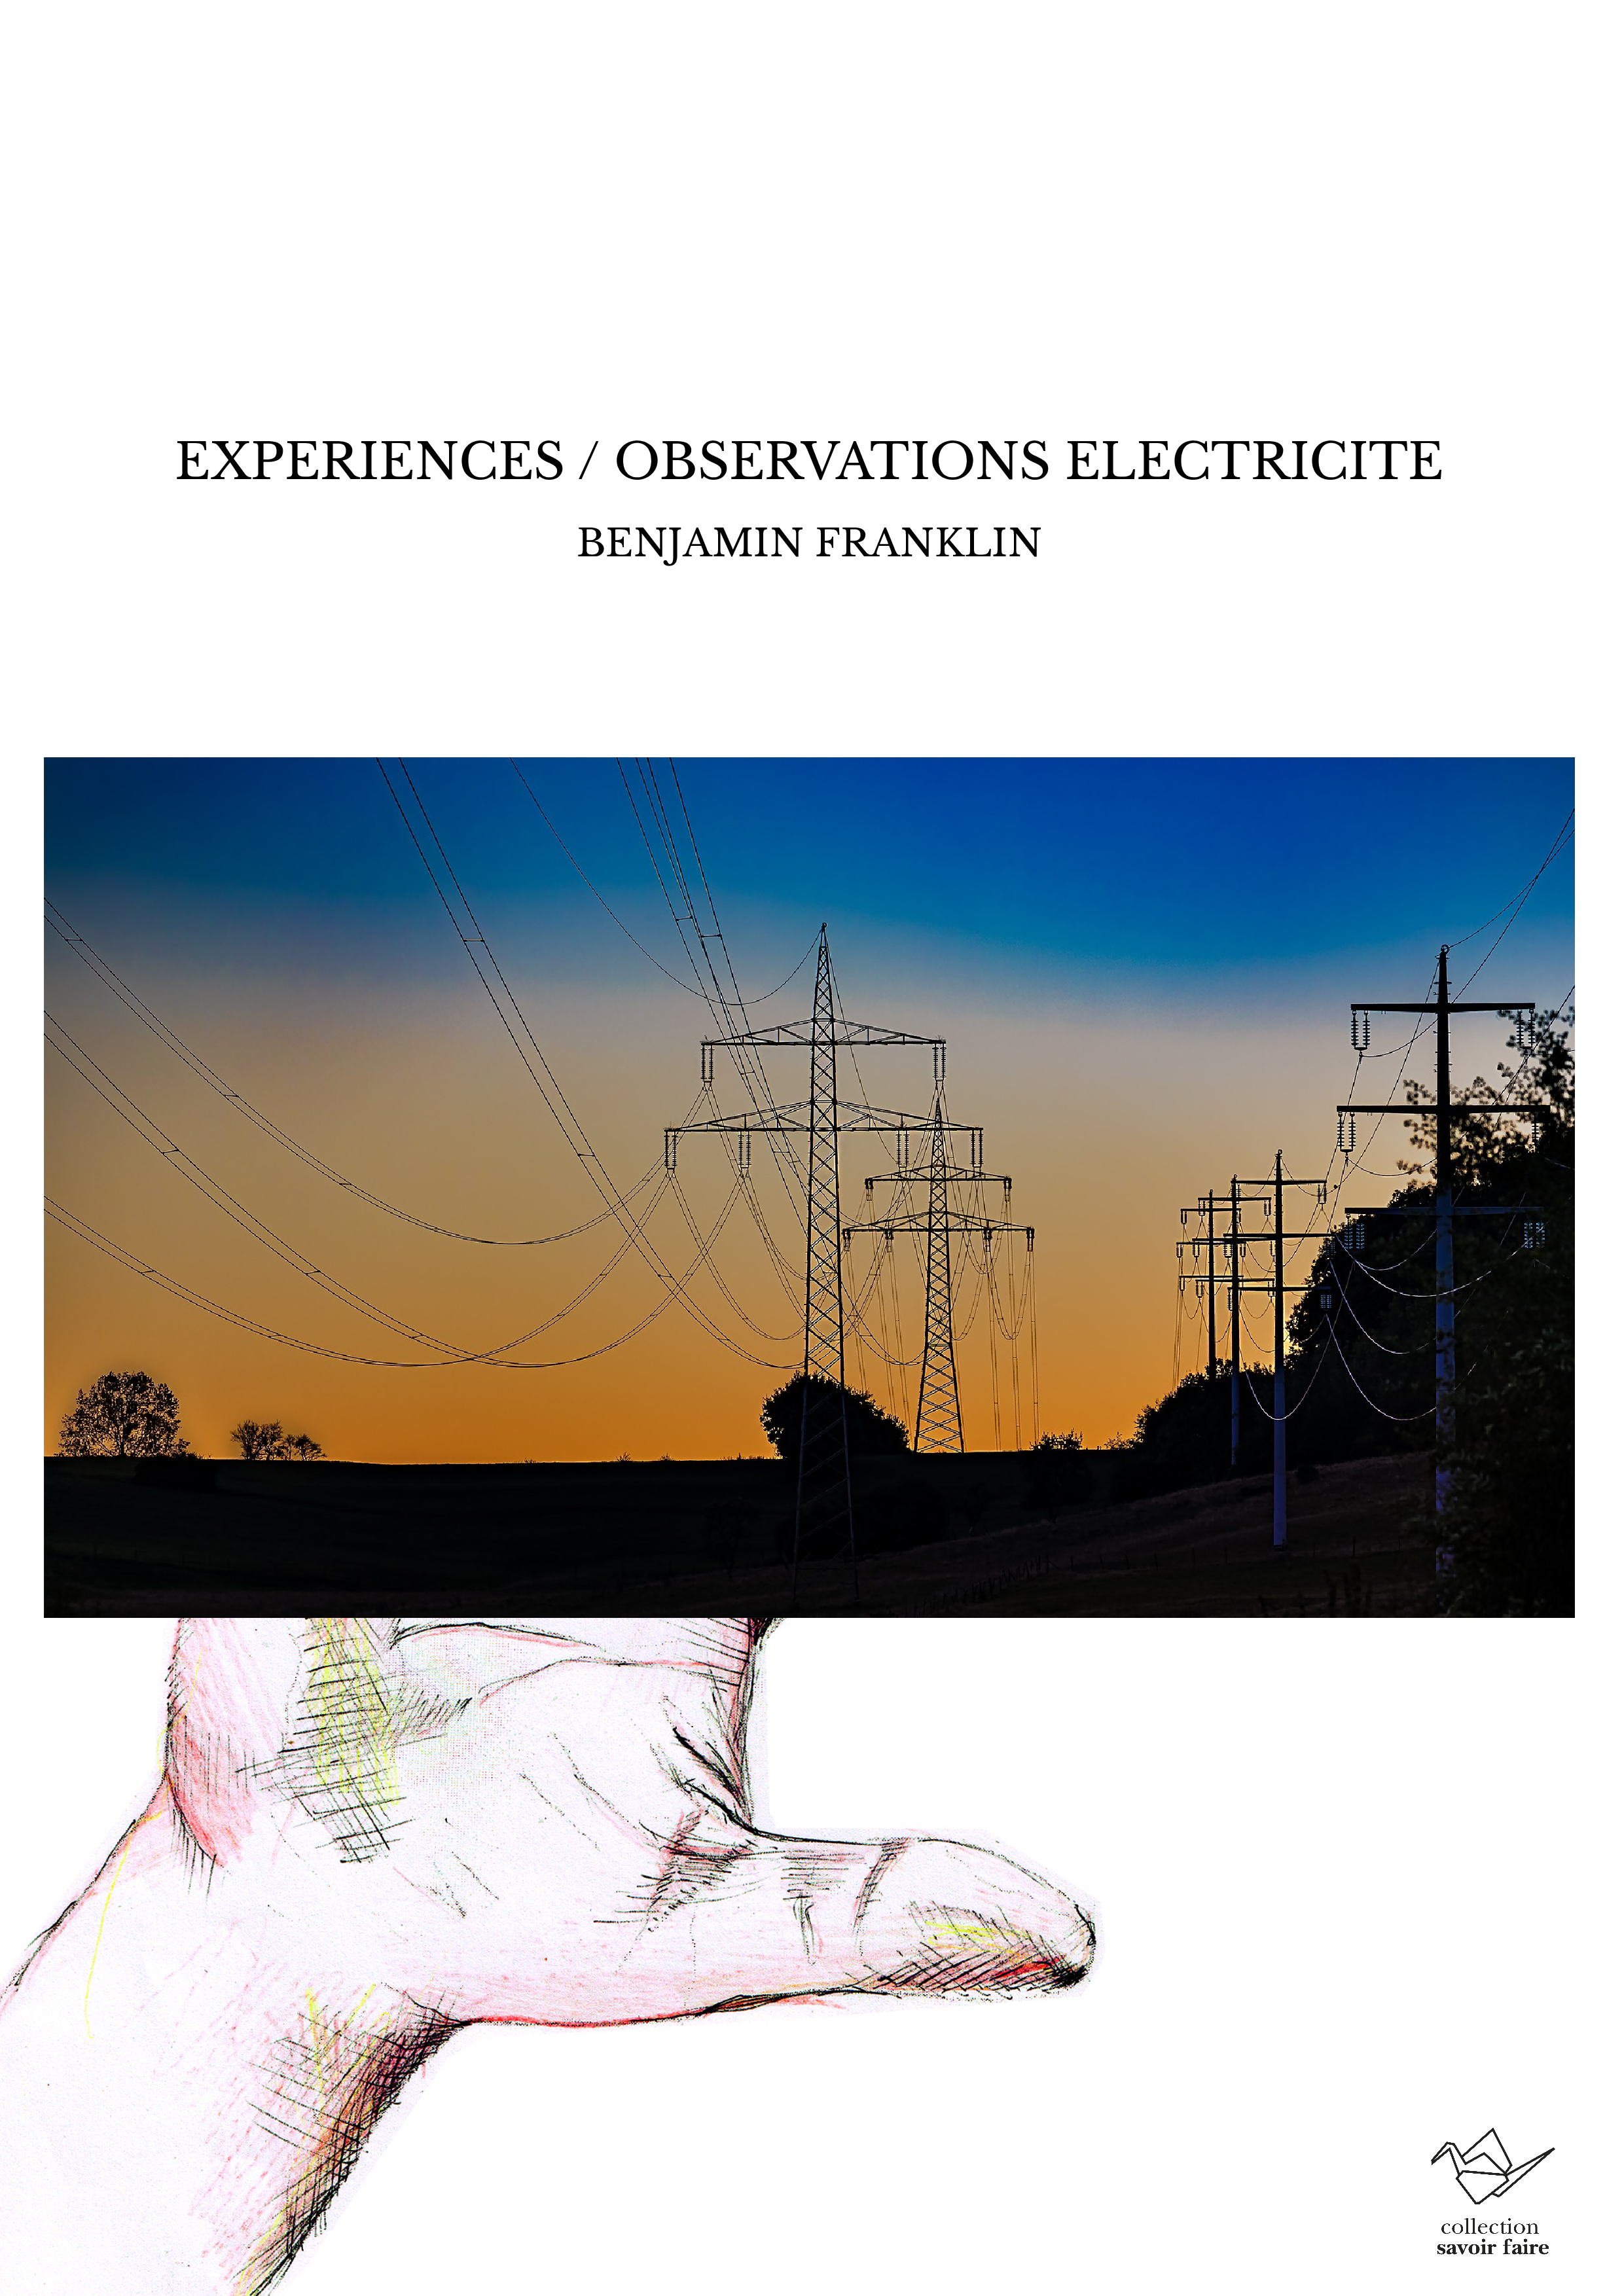 EXPERIENCES / OBSERVATIONS ELECTRICITE